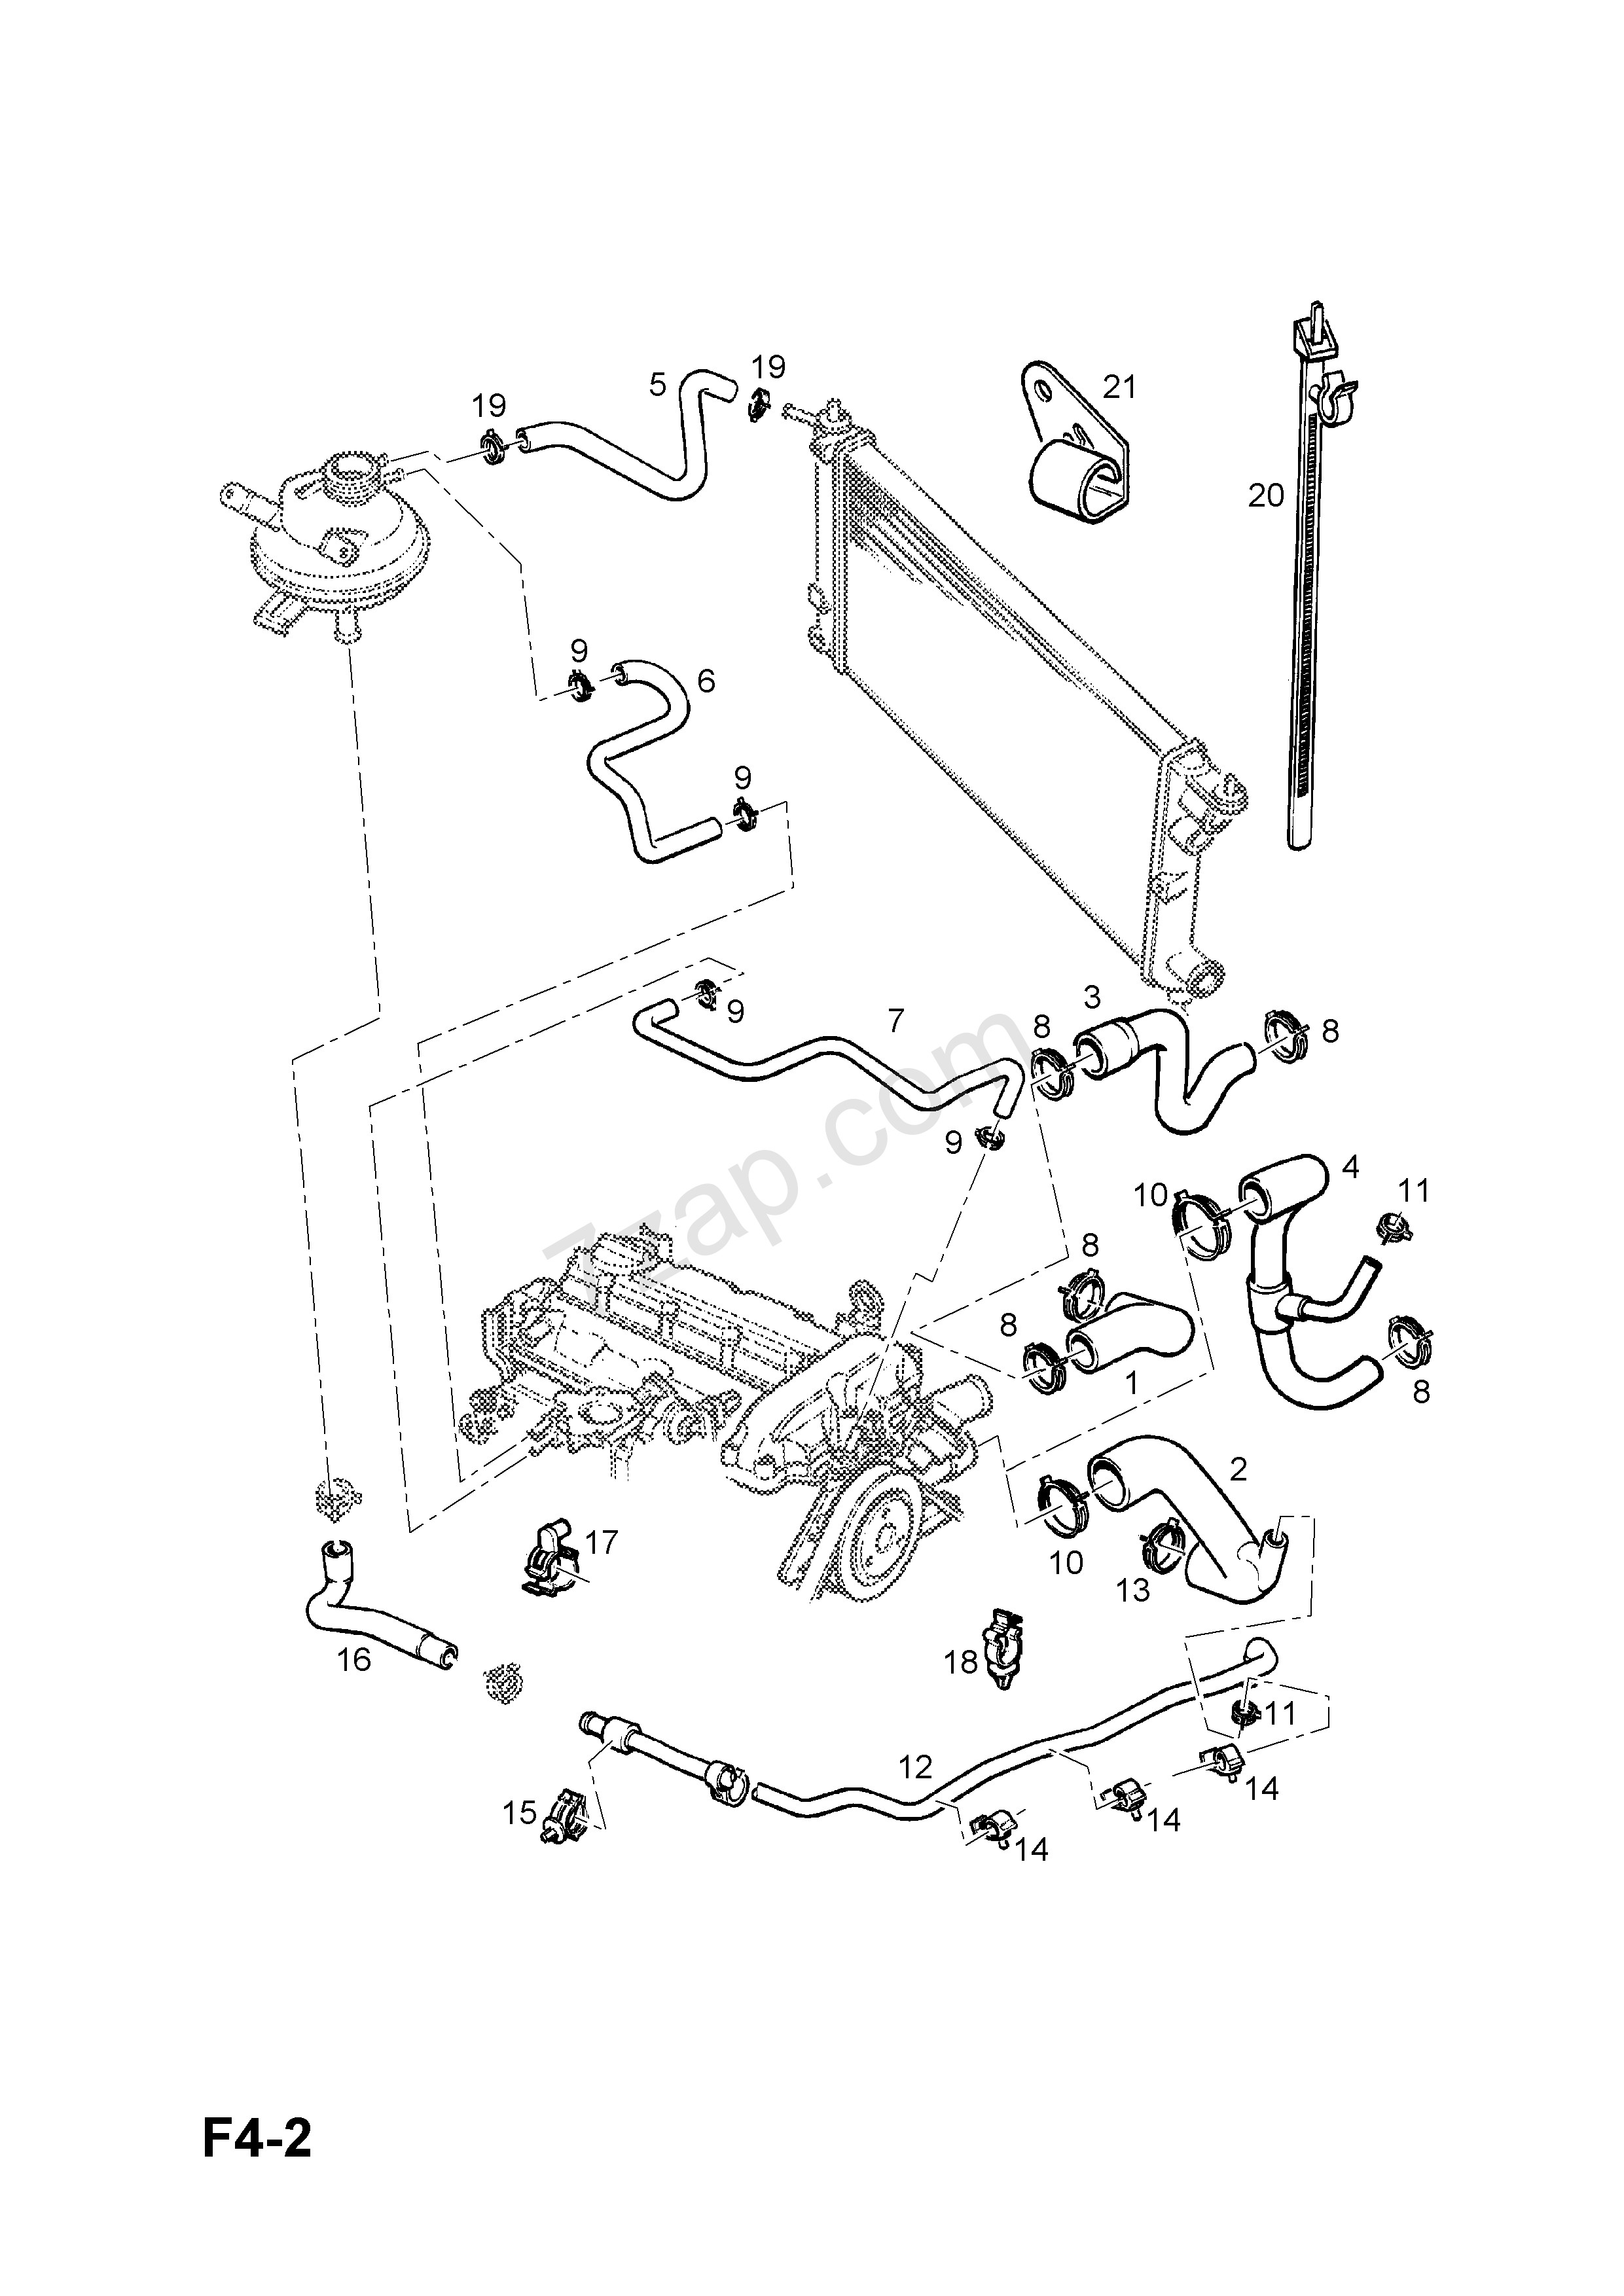 Opel Corsa Engine Diagram Hoses and Pipes Contd [x12xe[lw4] Engine] Opel Corsa B Tigra A Of Opel Corsa Engine Diagram